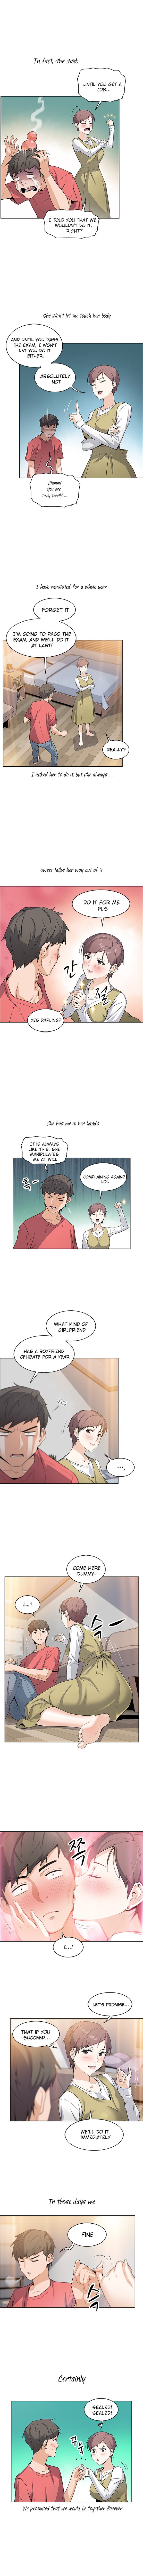 Housekeeper Manhwa - Chapter 1 Page 6